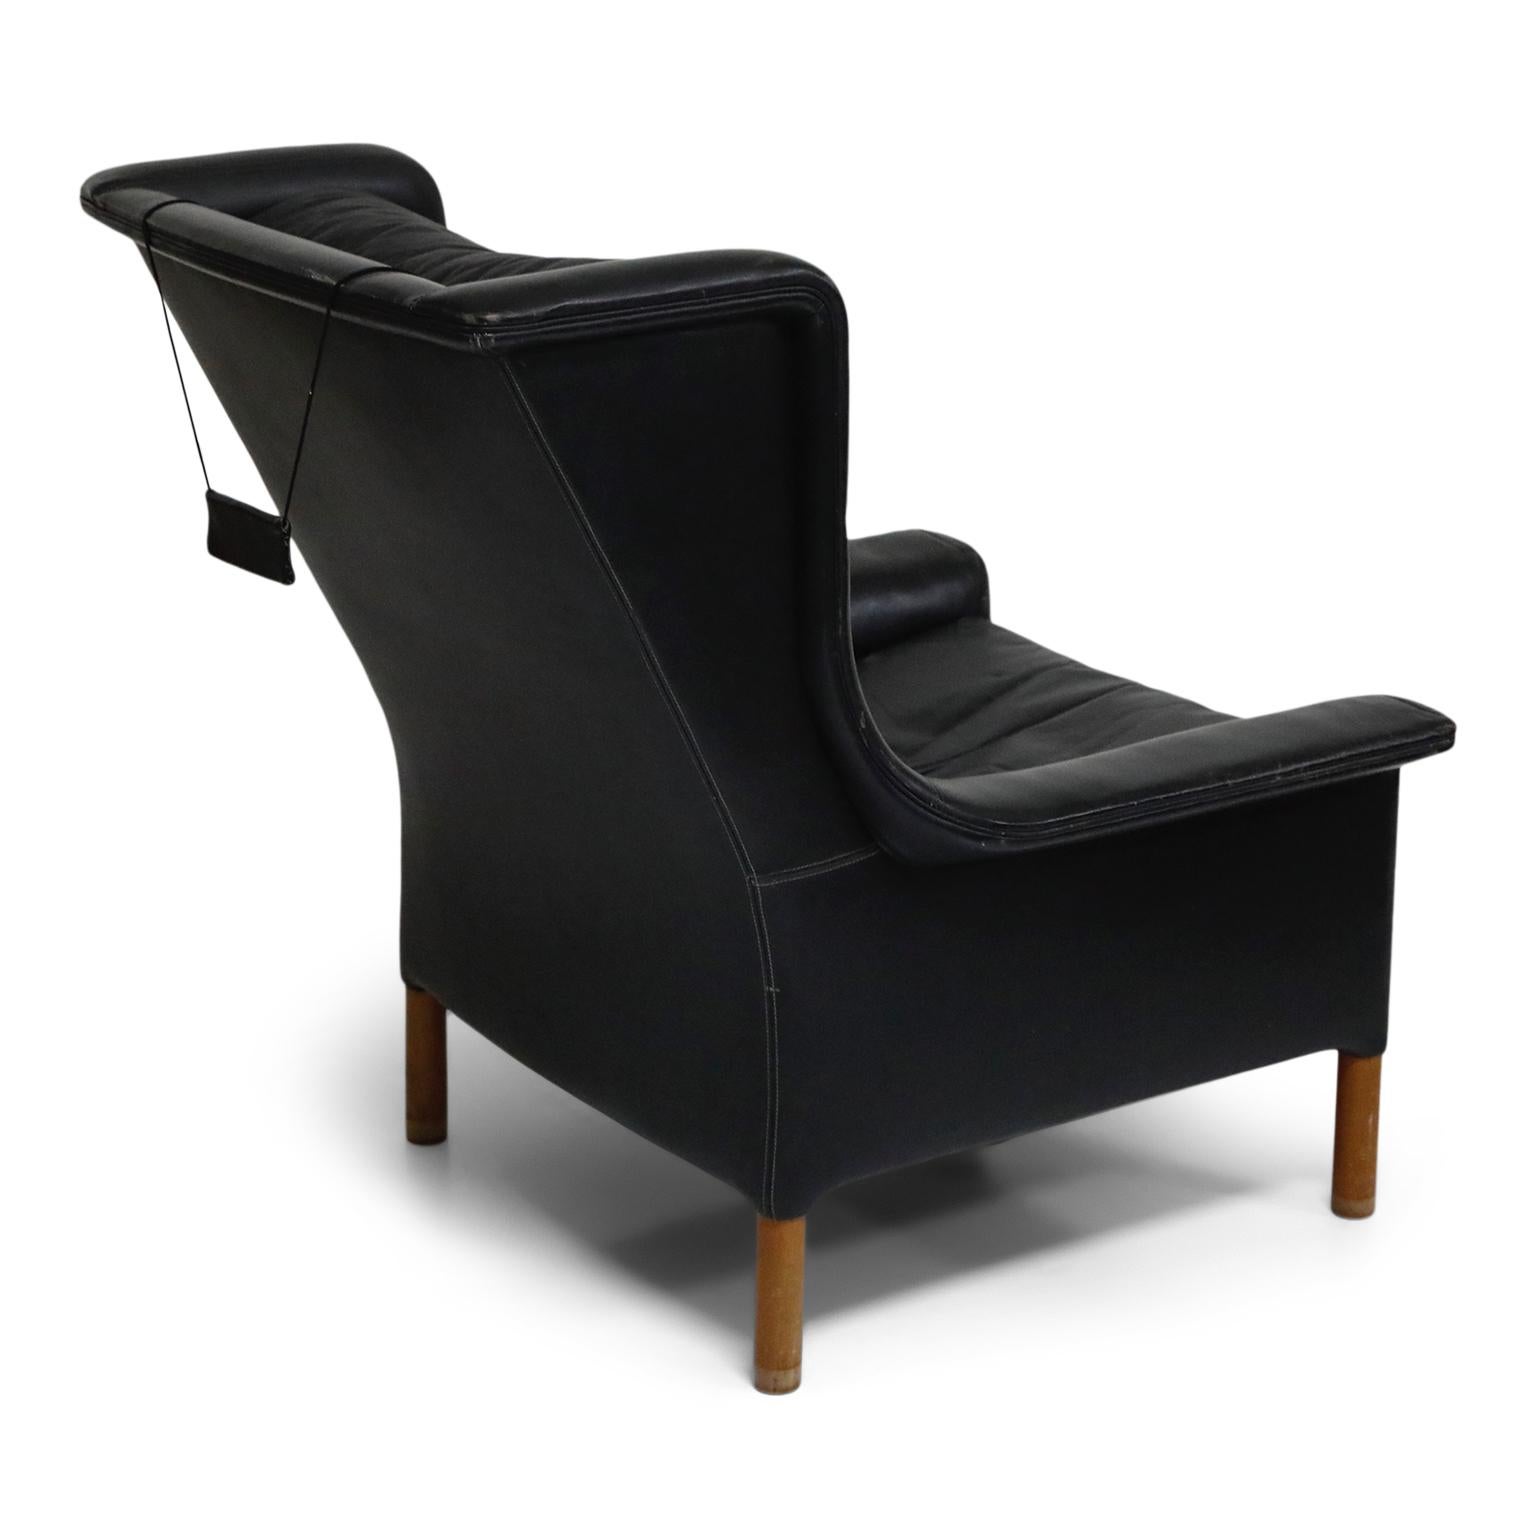 Mid-20th Century Pair of Black Leather Wingback Chairs and Ottoman by Gerhard Berg, 1965